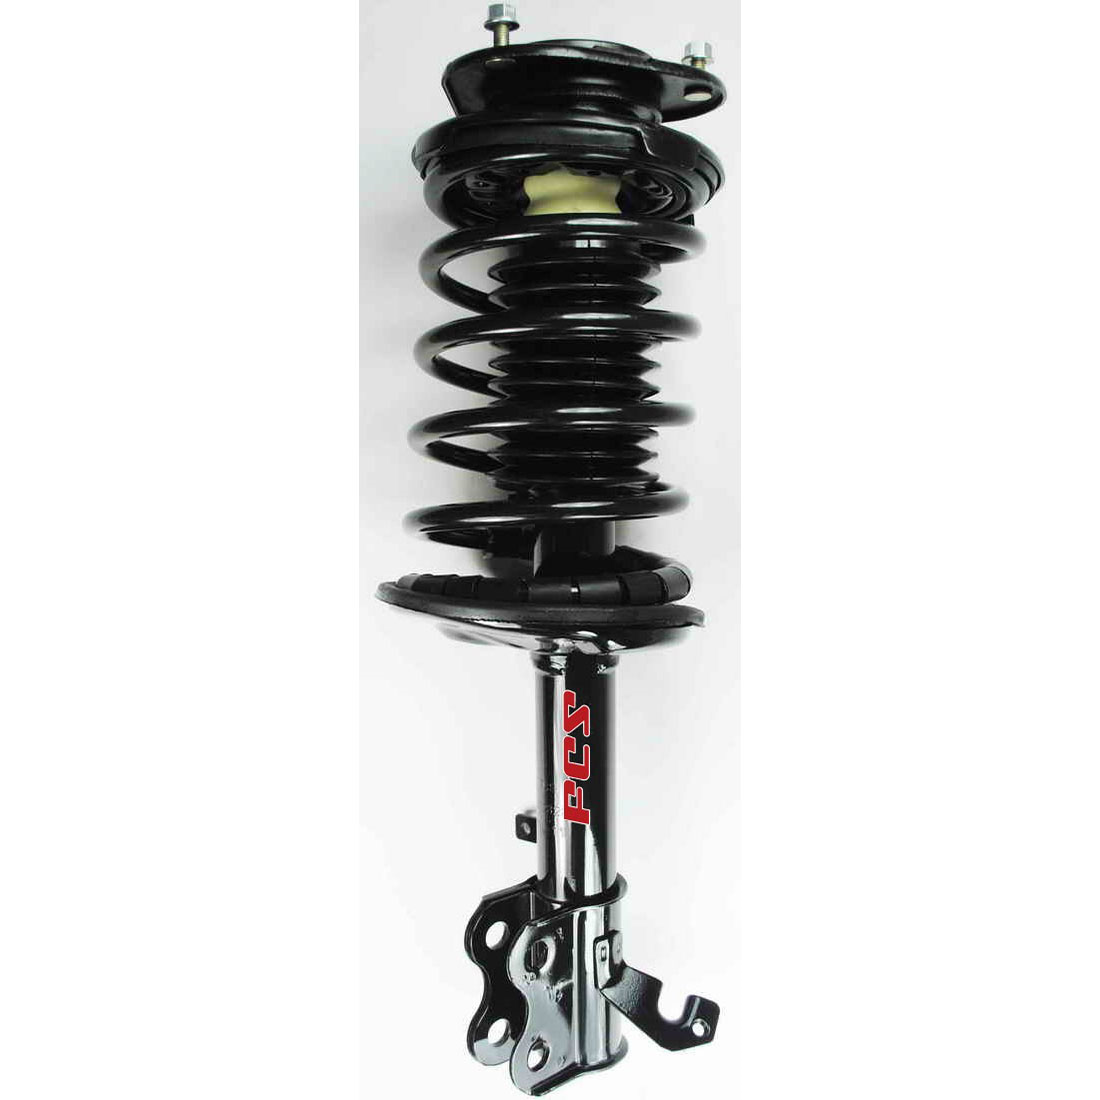 FCS Shocks And Struts Assembly Complete Coil Spring Suspension For Chevrolet Prizm 1998 1999 2000 2001 2002 For Toyota Corolla 1993 1994 1995 1996 1997 1998 1999 2000 2001 2002 - image 4 of 9